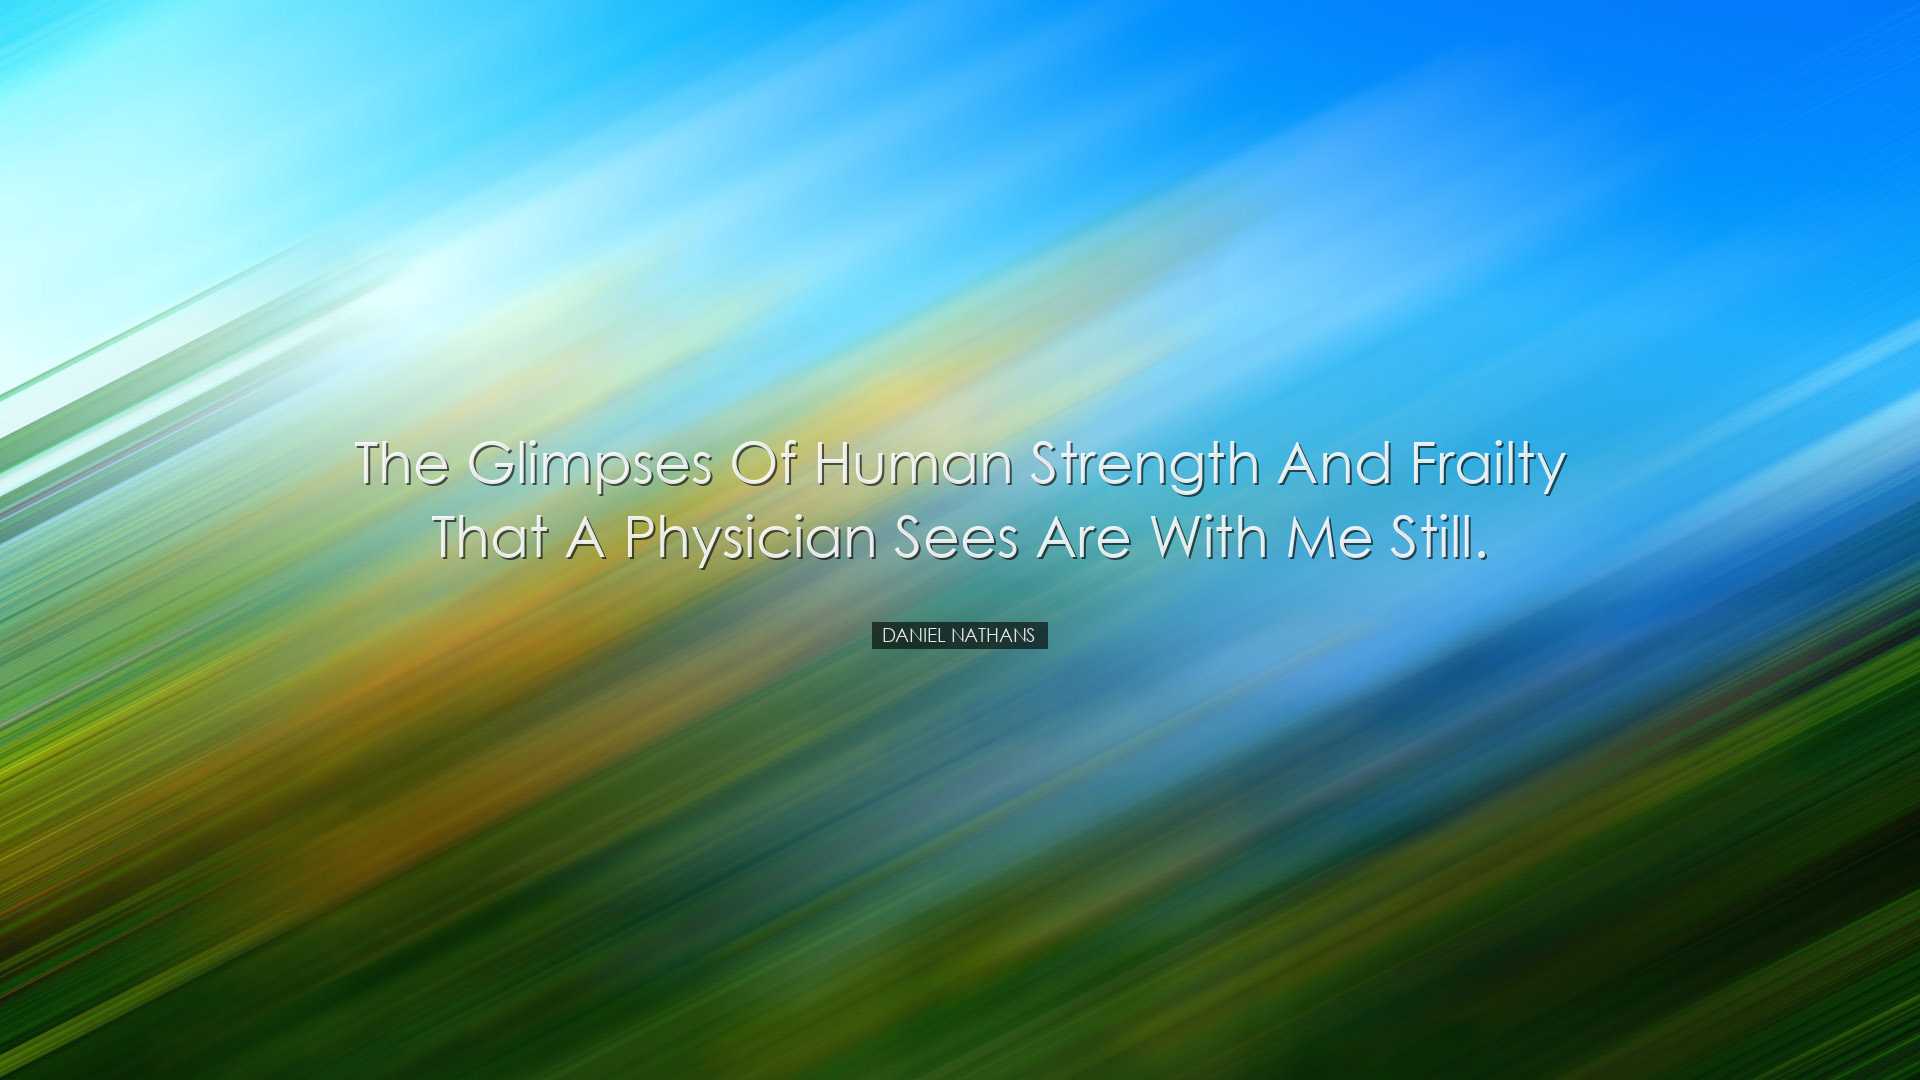 The glimpses of human strength and frailty that a physician sees a